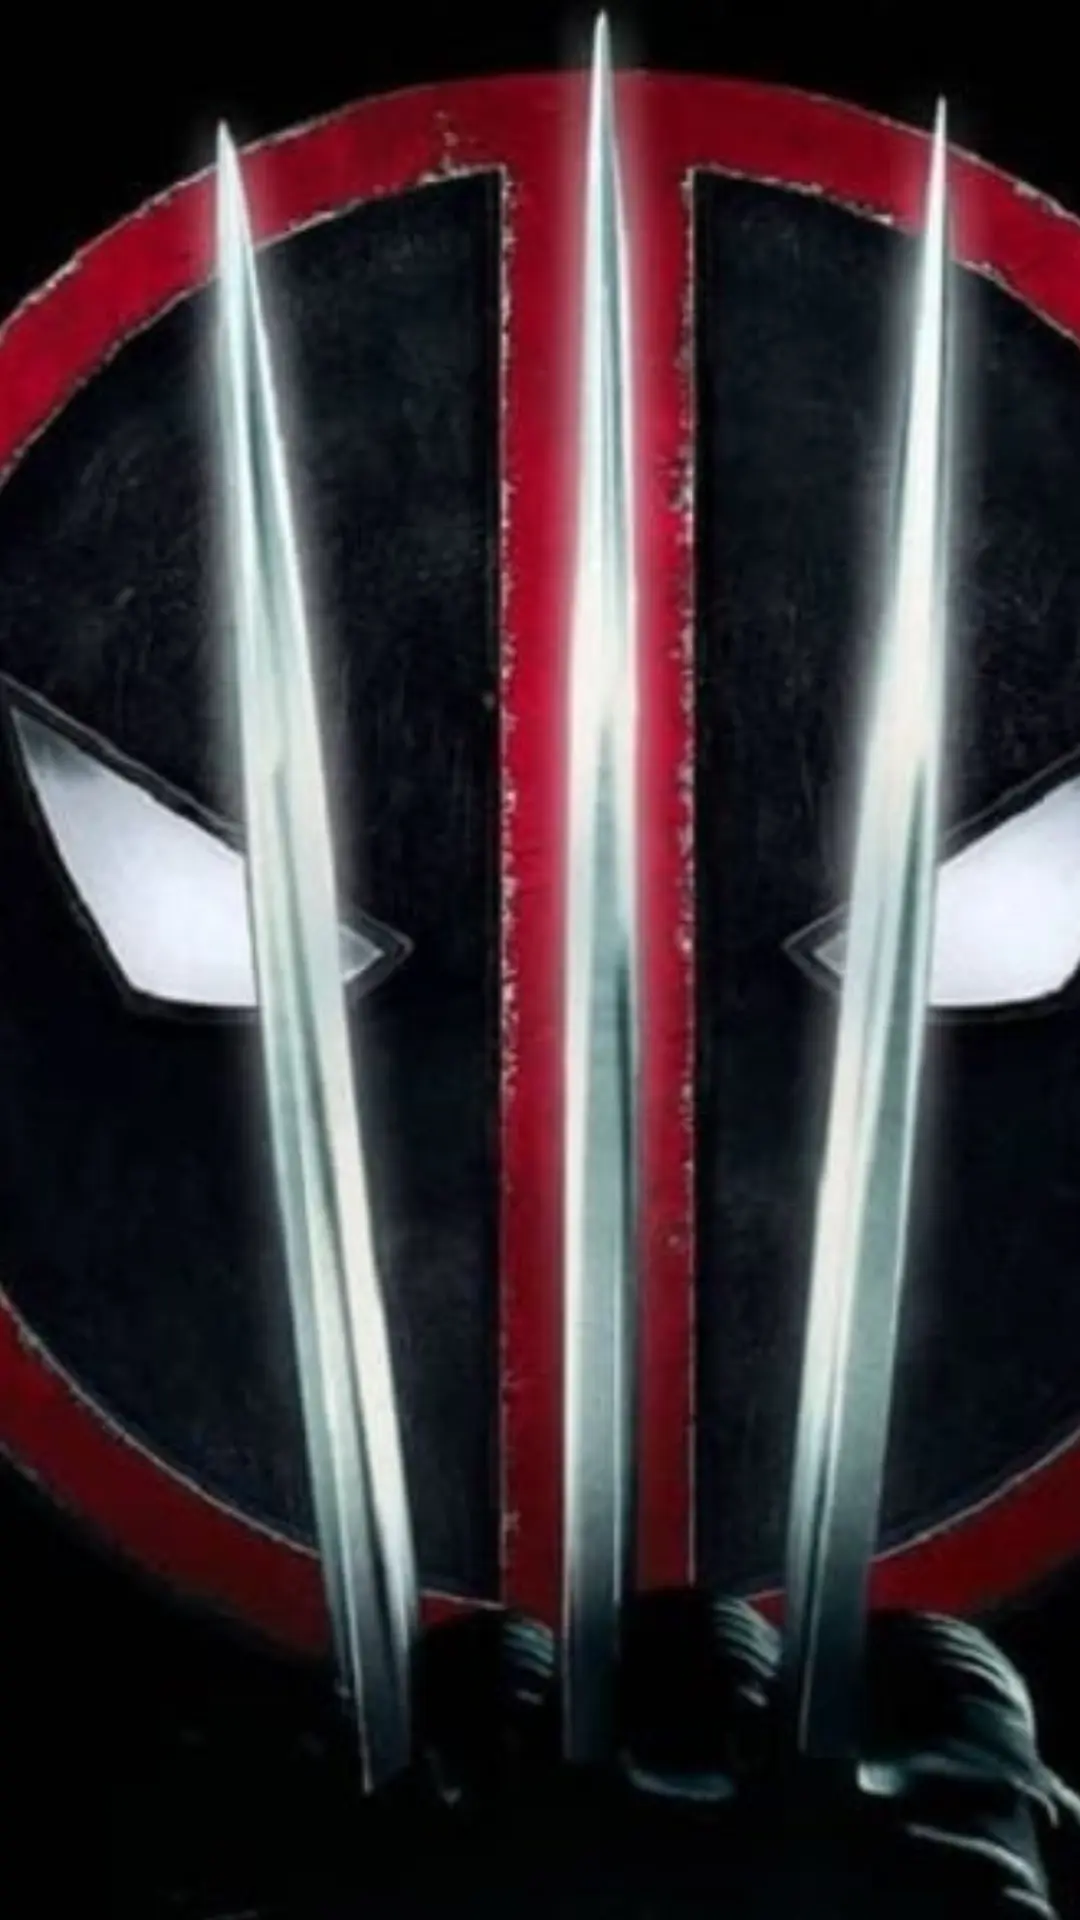 Deadpool and Wolverine: Pre-Release Excitement and Initial Reactions